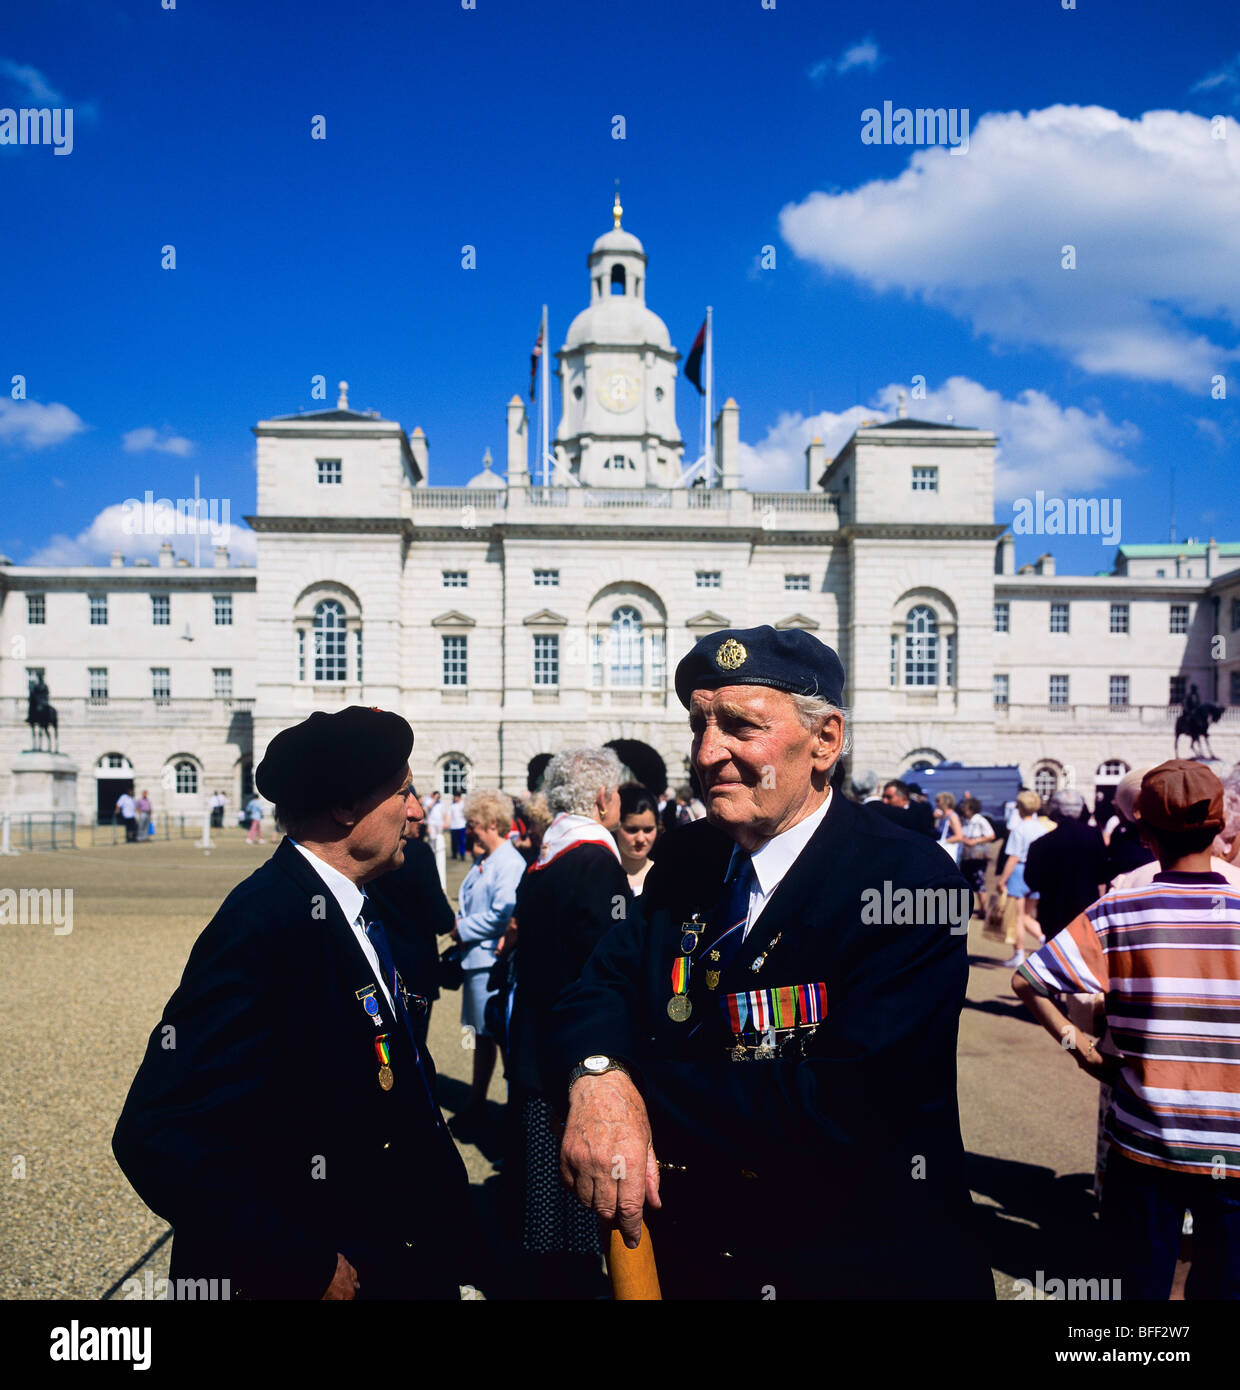 Normandy veterans at D-Day remembrance parade at Whitehall London Great Britain Stock Photo